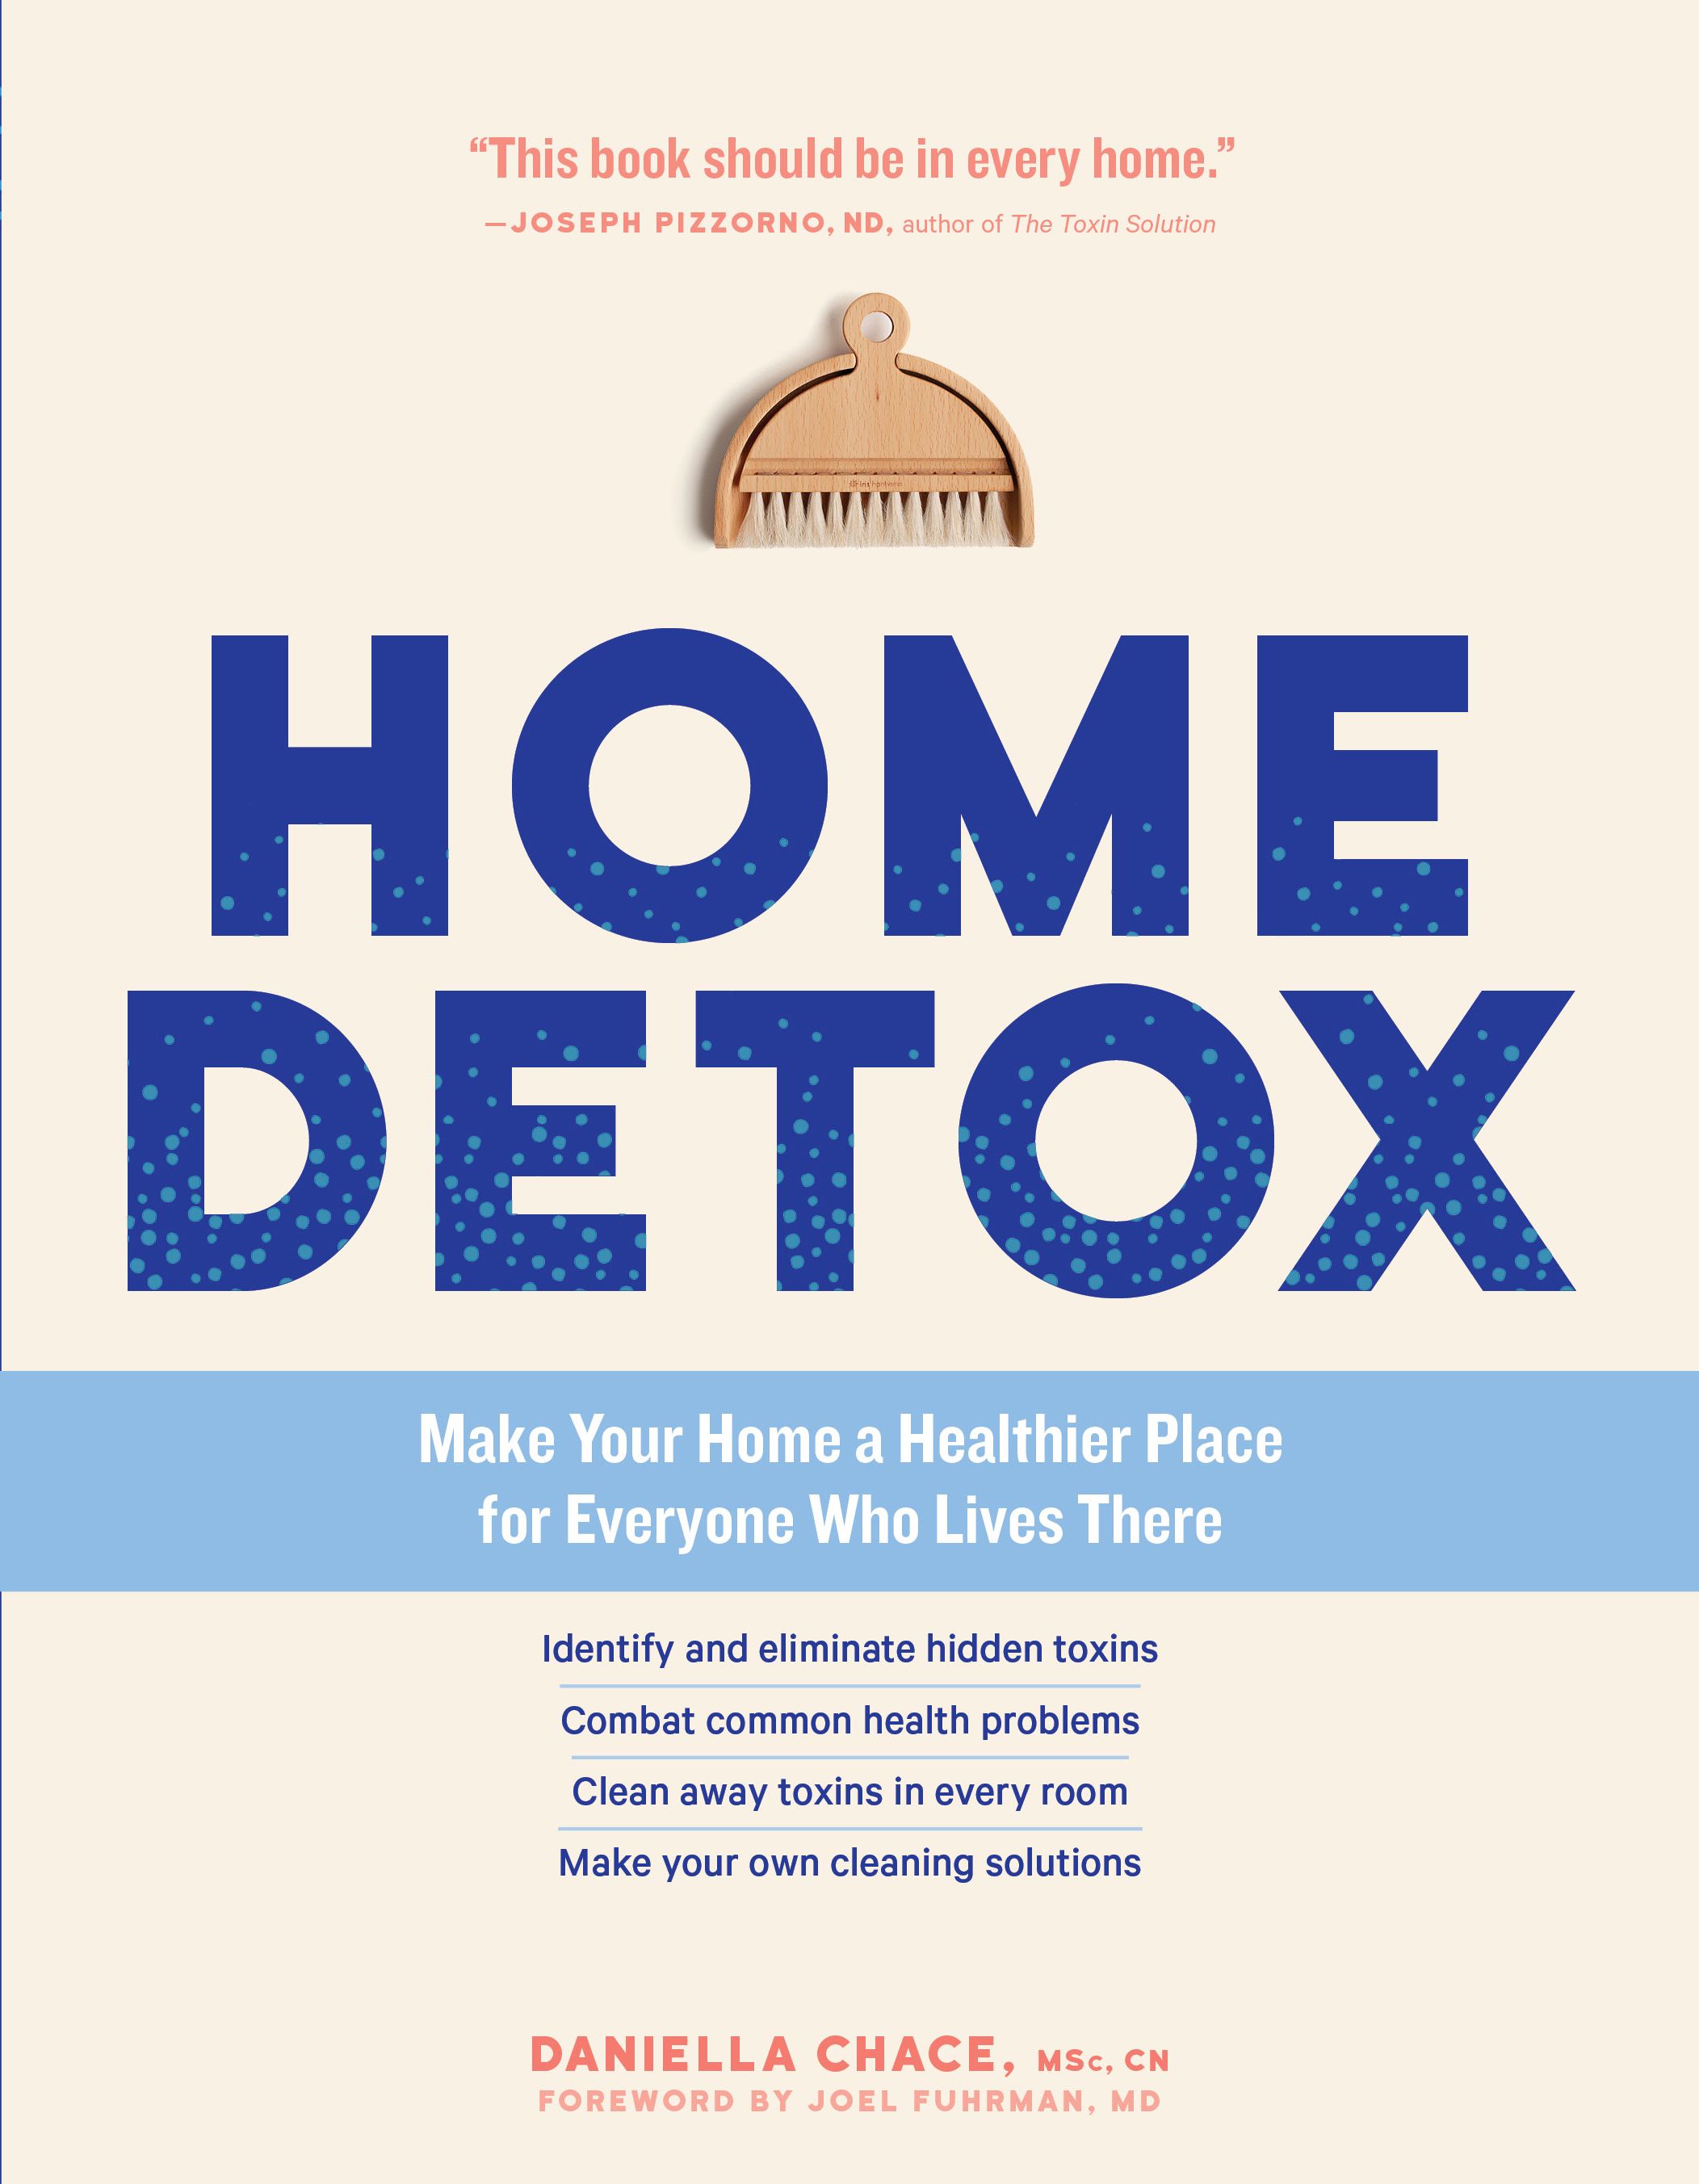 image of the cover of the book, Home Detox by Daniella Chase